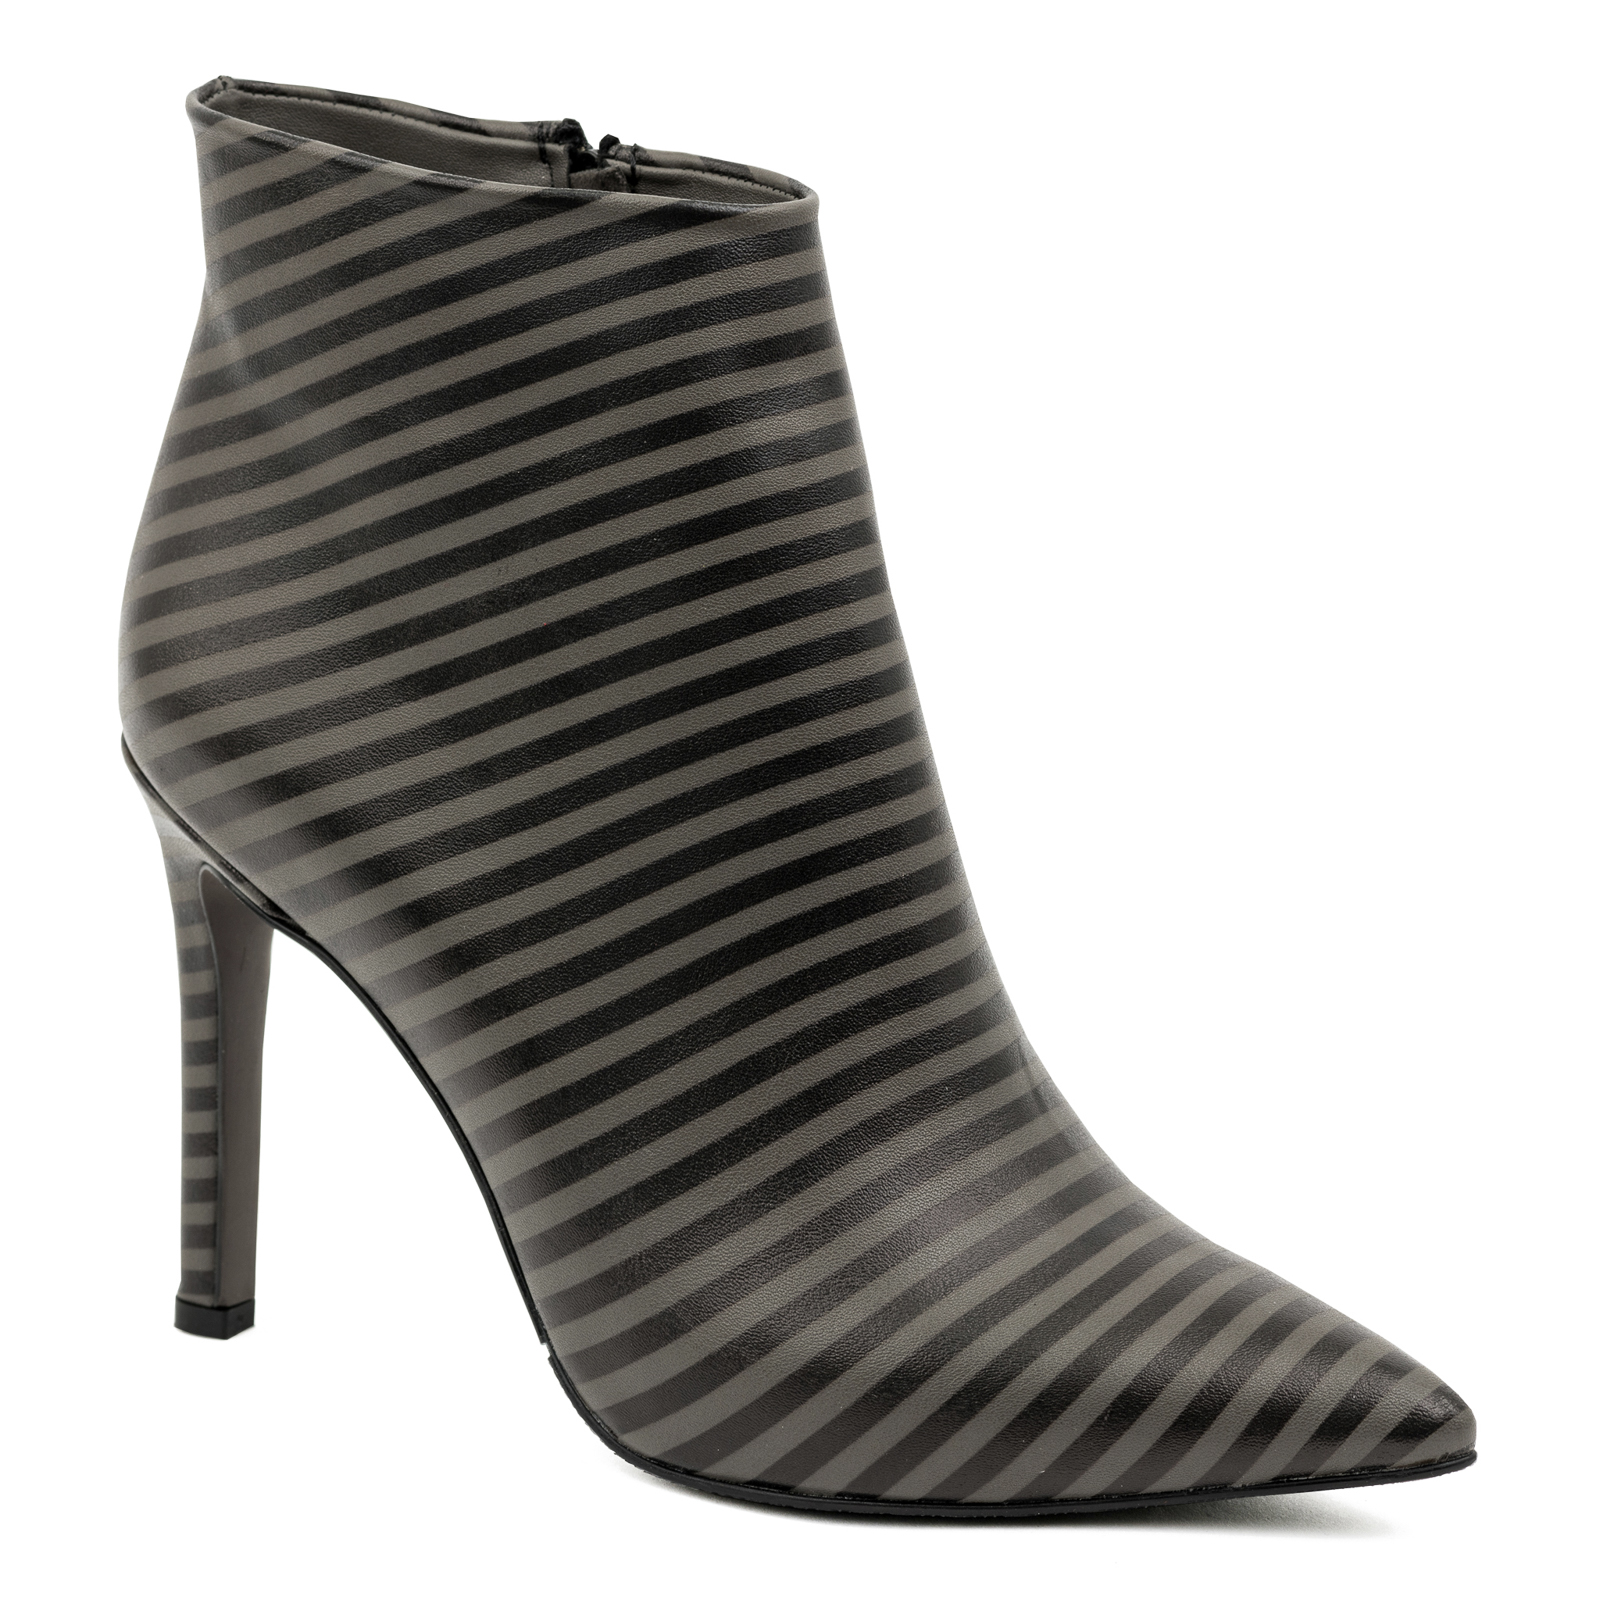 STRIPED SPIKE ANKLE BOOTS WITH THIN HEEL - BLACK/GRAY